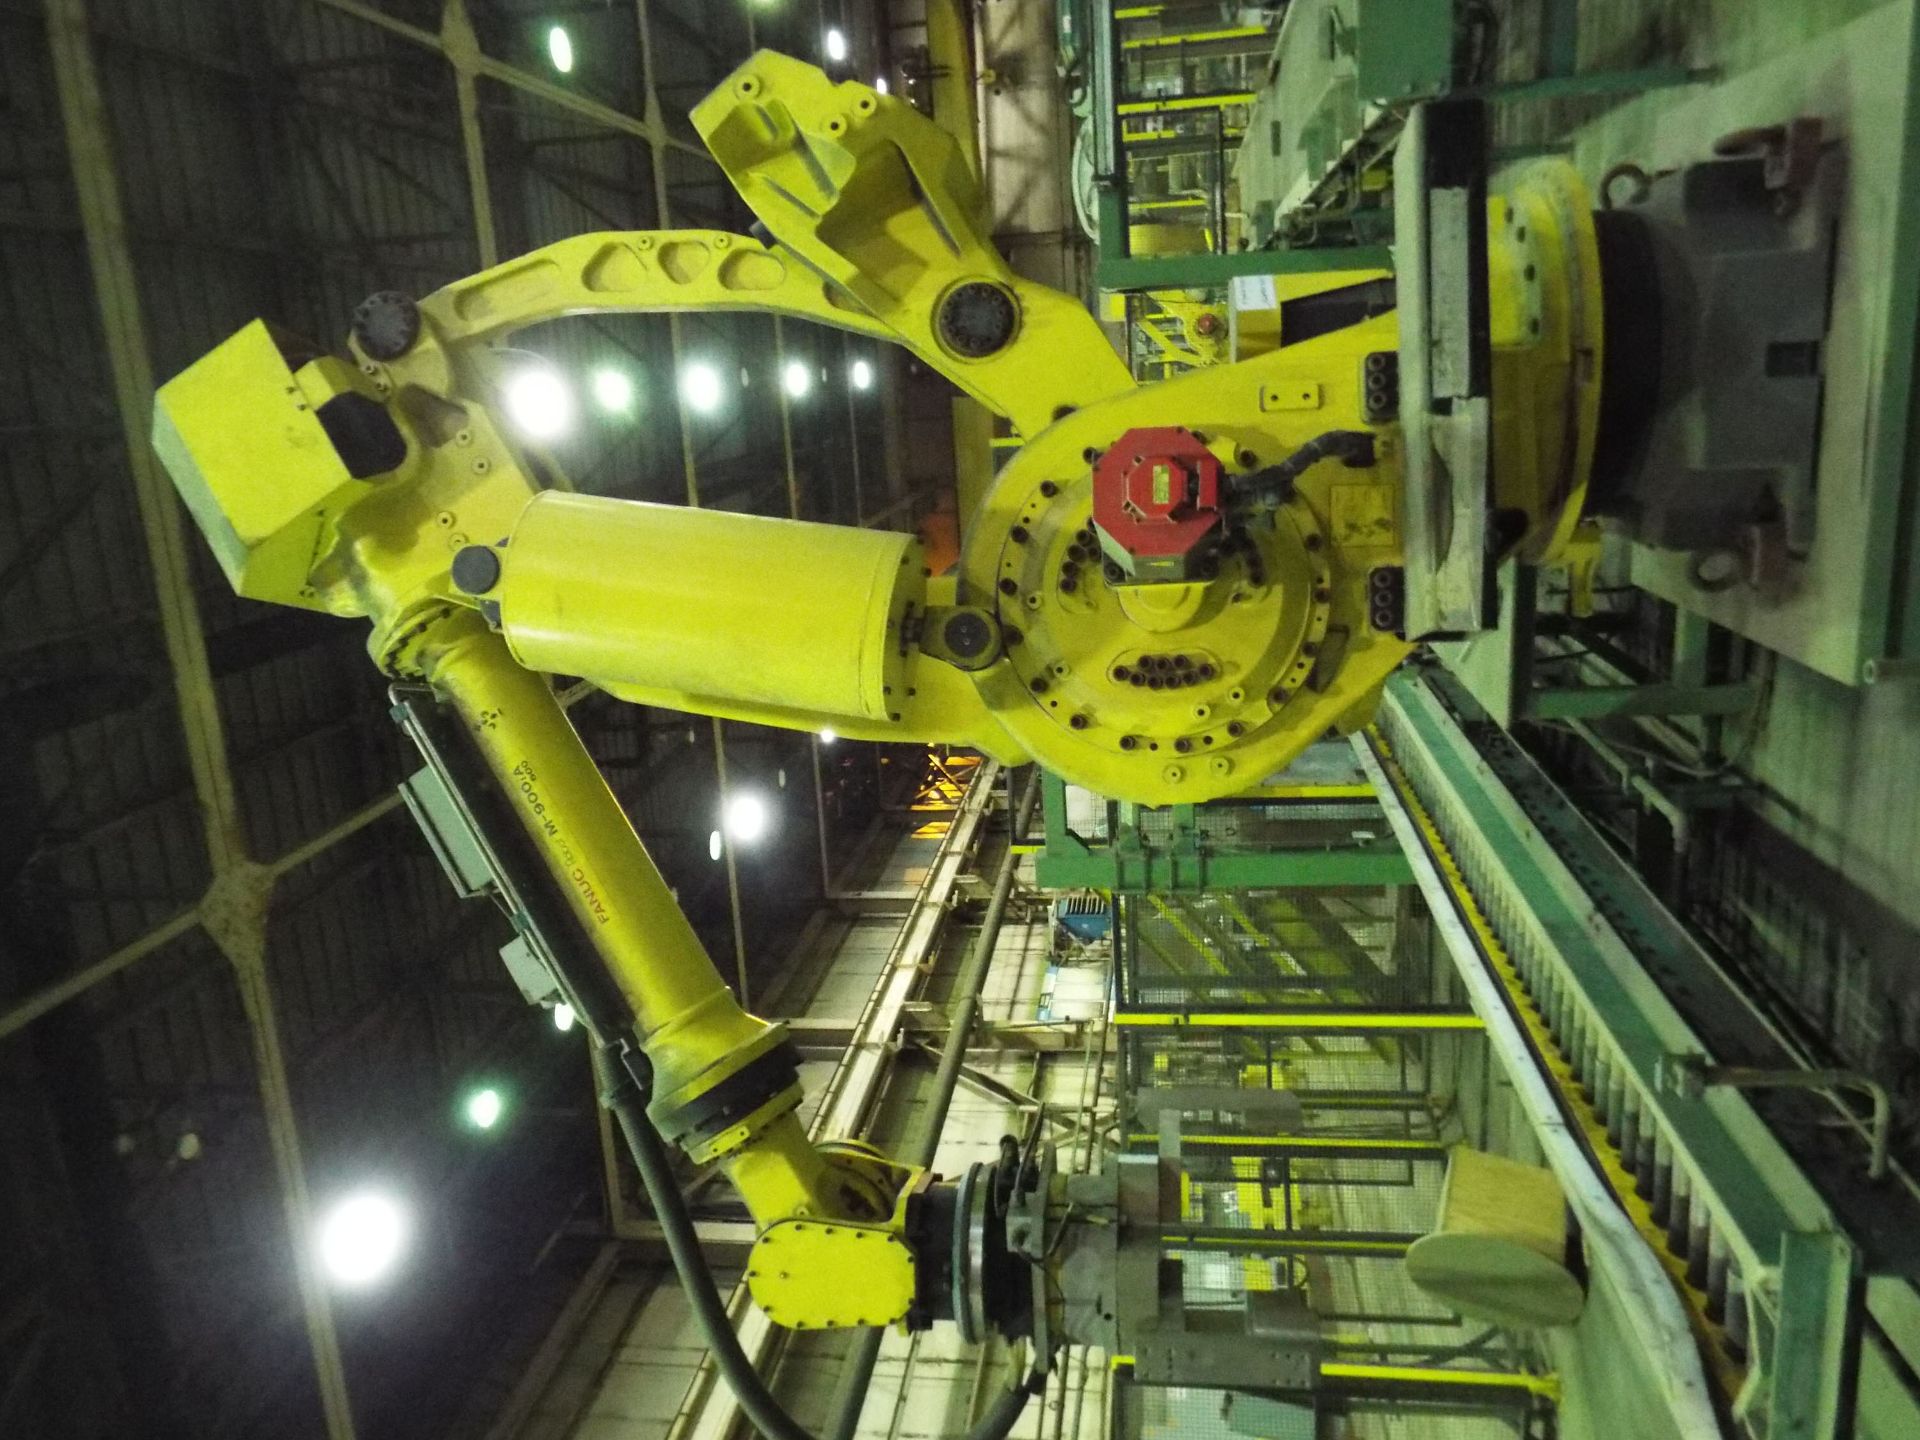 LOT/ FANUC M-900iA 6 AXIS PICK AND PLACE ROBOT WITH DRUM PICKING HEAD, ROBOT TOOL CHANGE STATION,